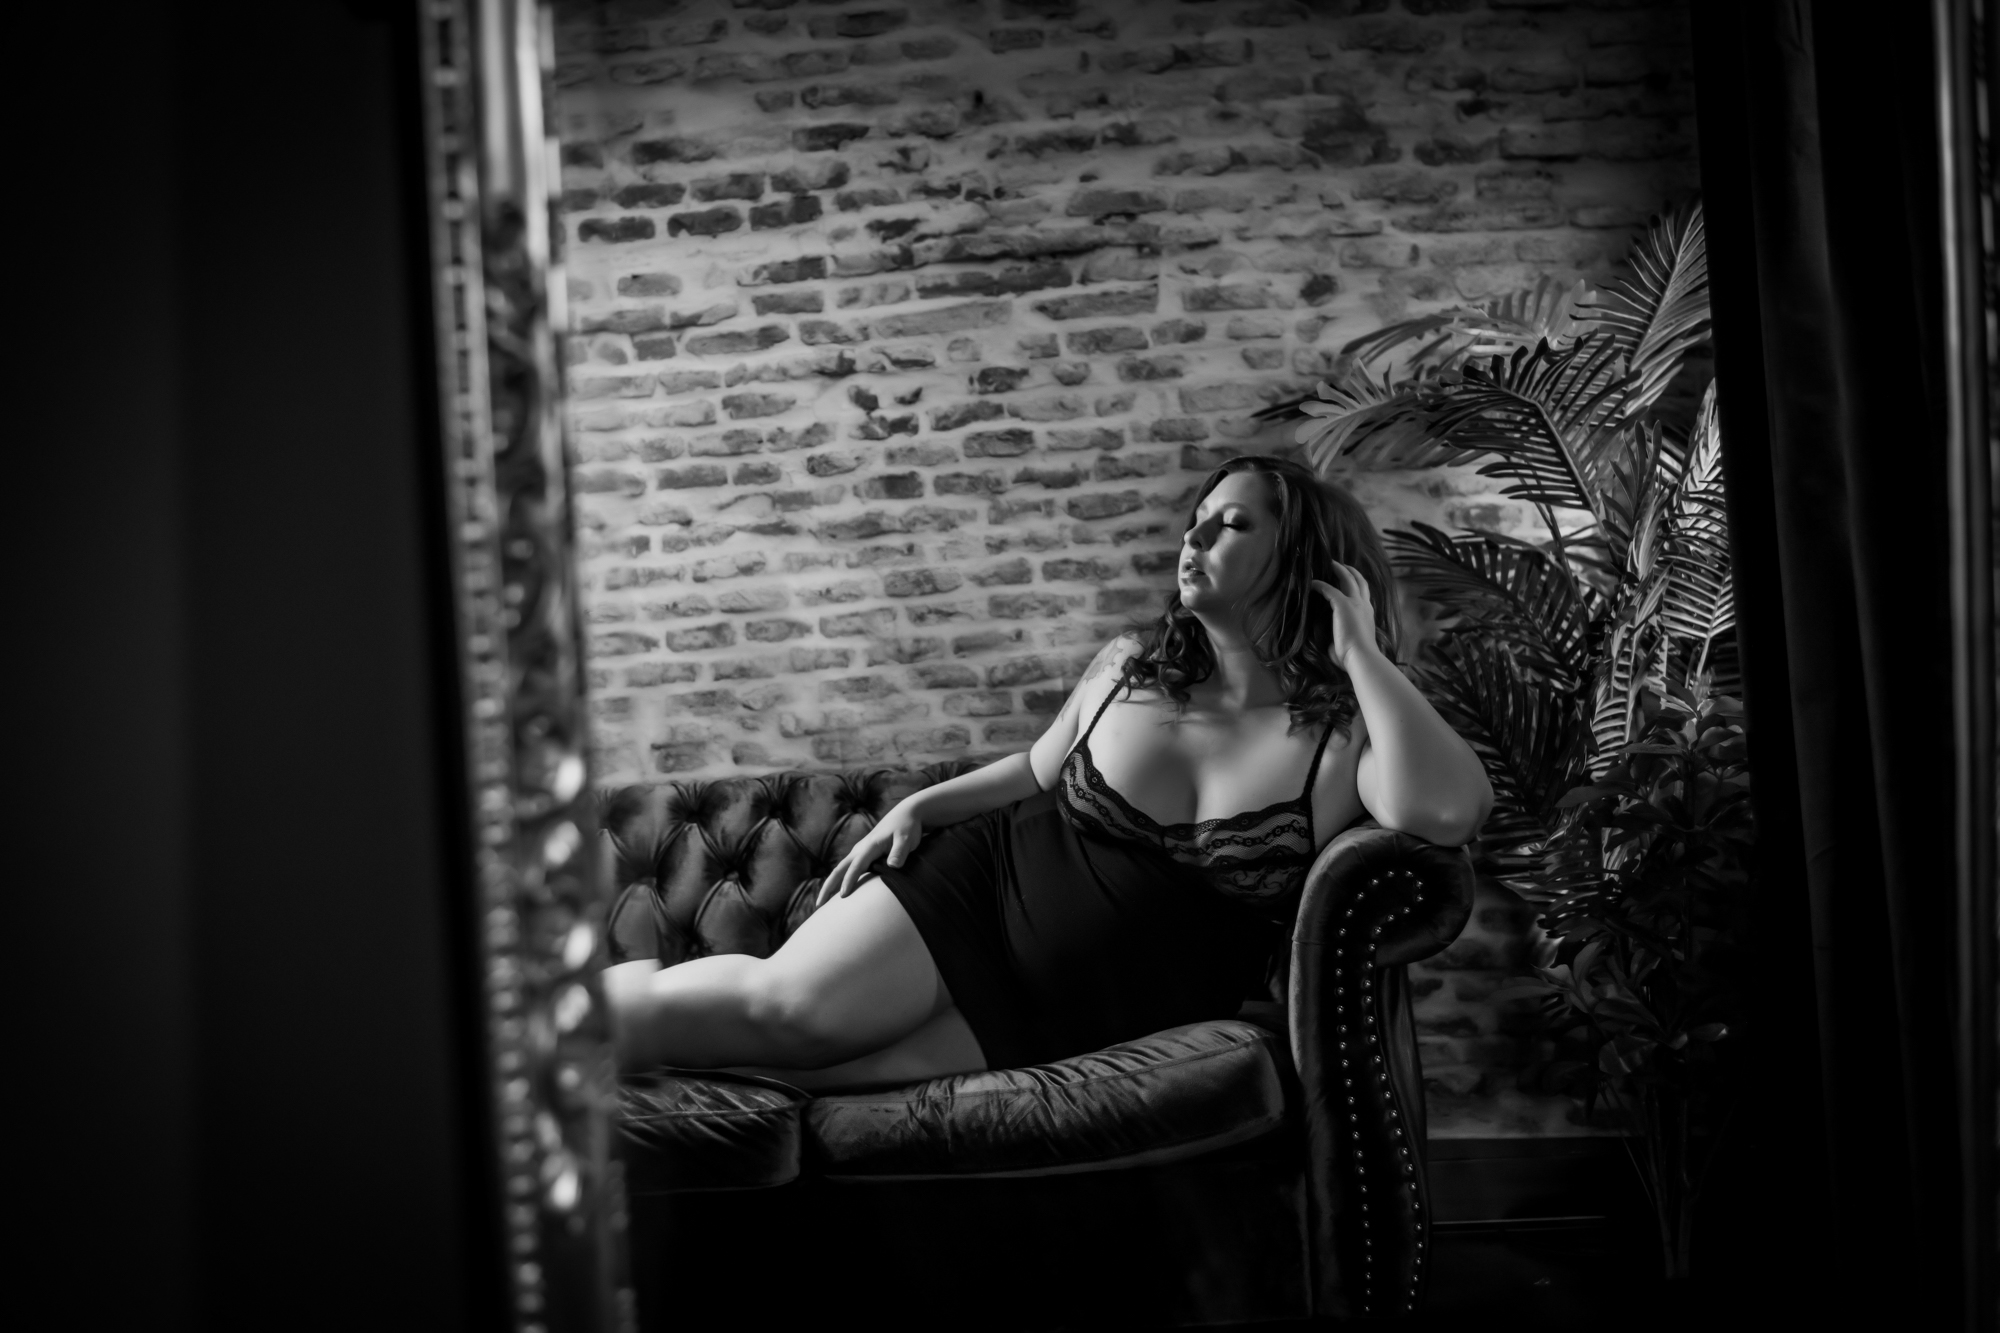 A woman in black lingerie poses on a couch in the rochester new york boudoir studio.